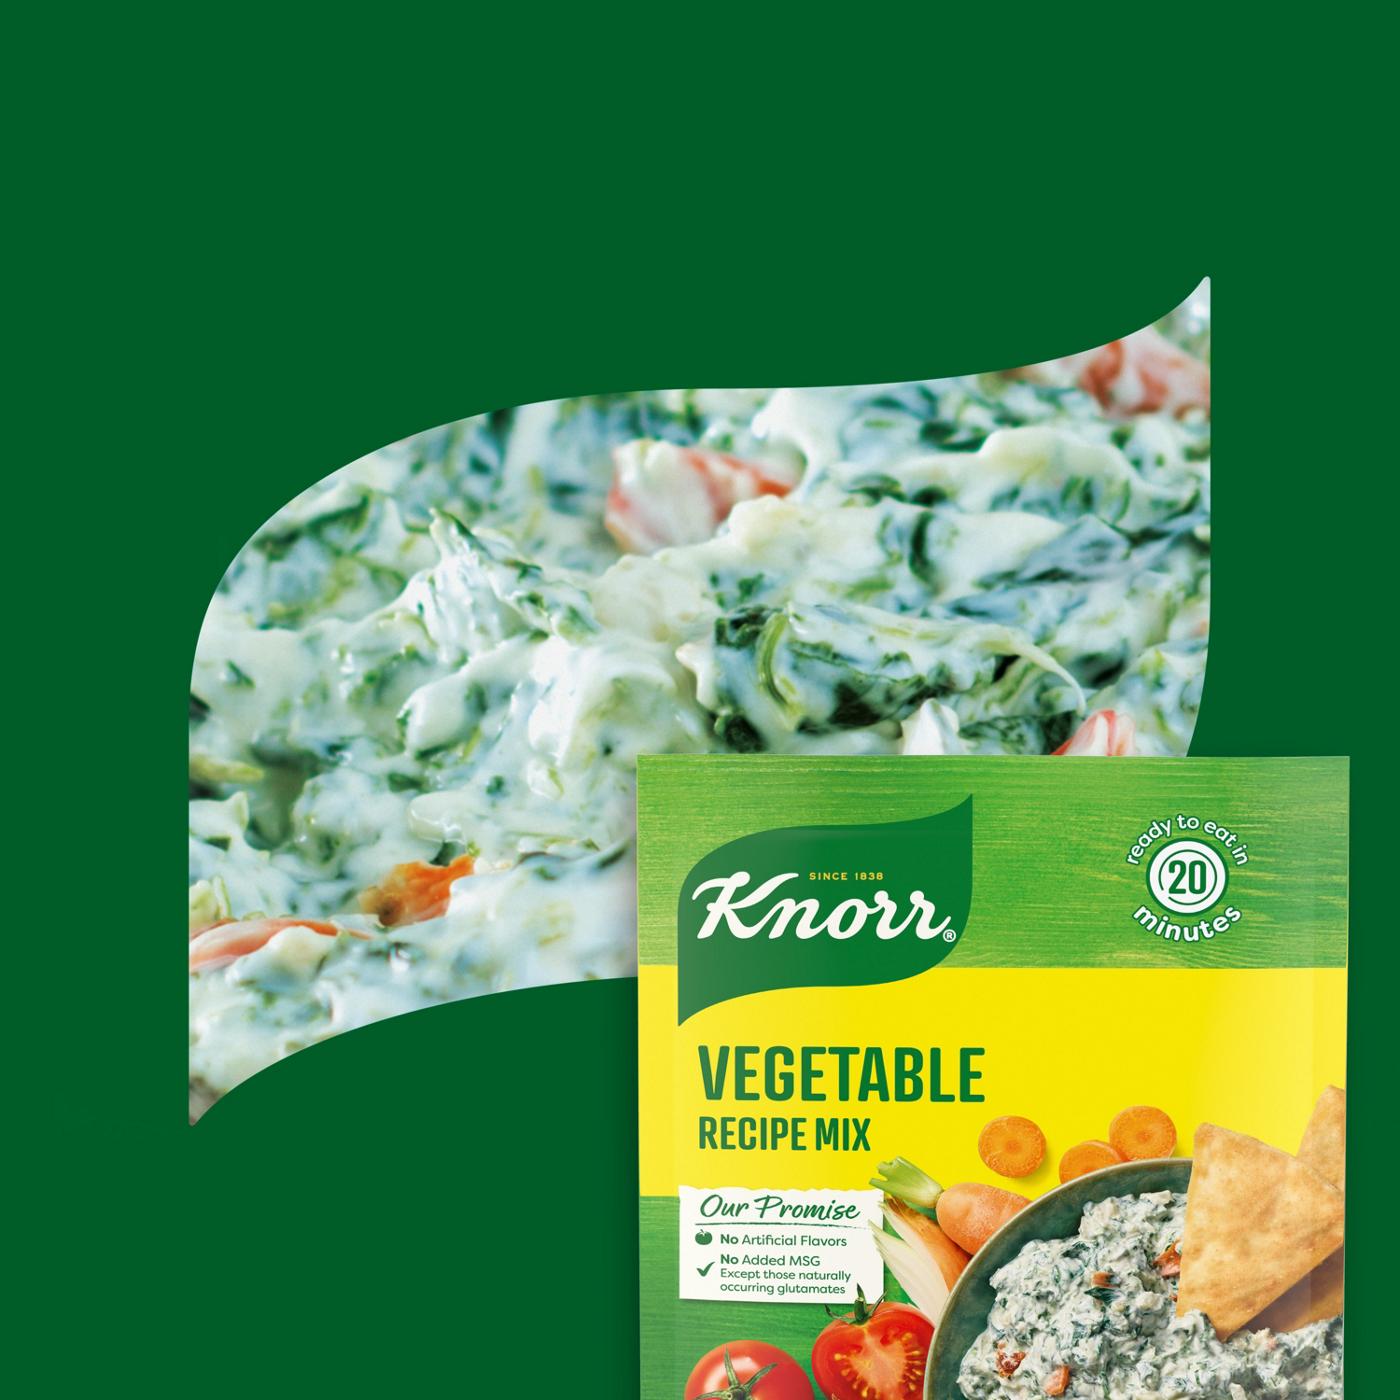 Knorr Vegetable Recipe Mix; image 6 of 7